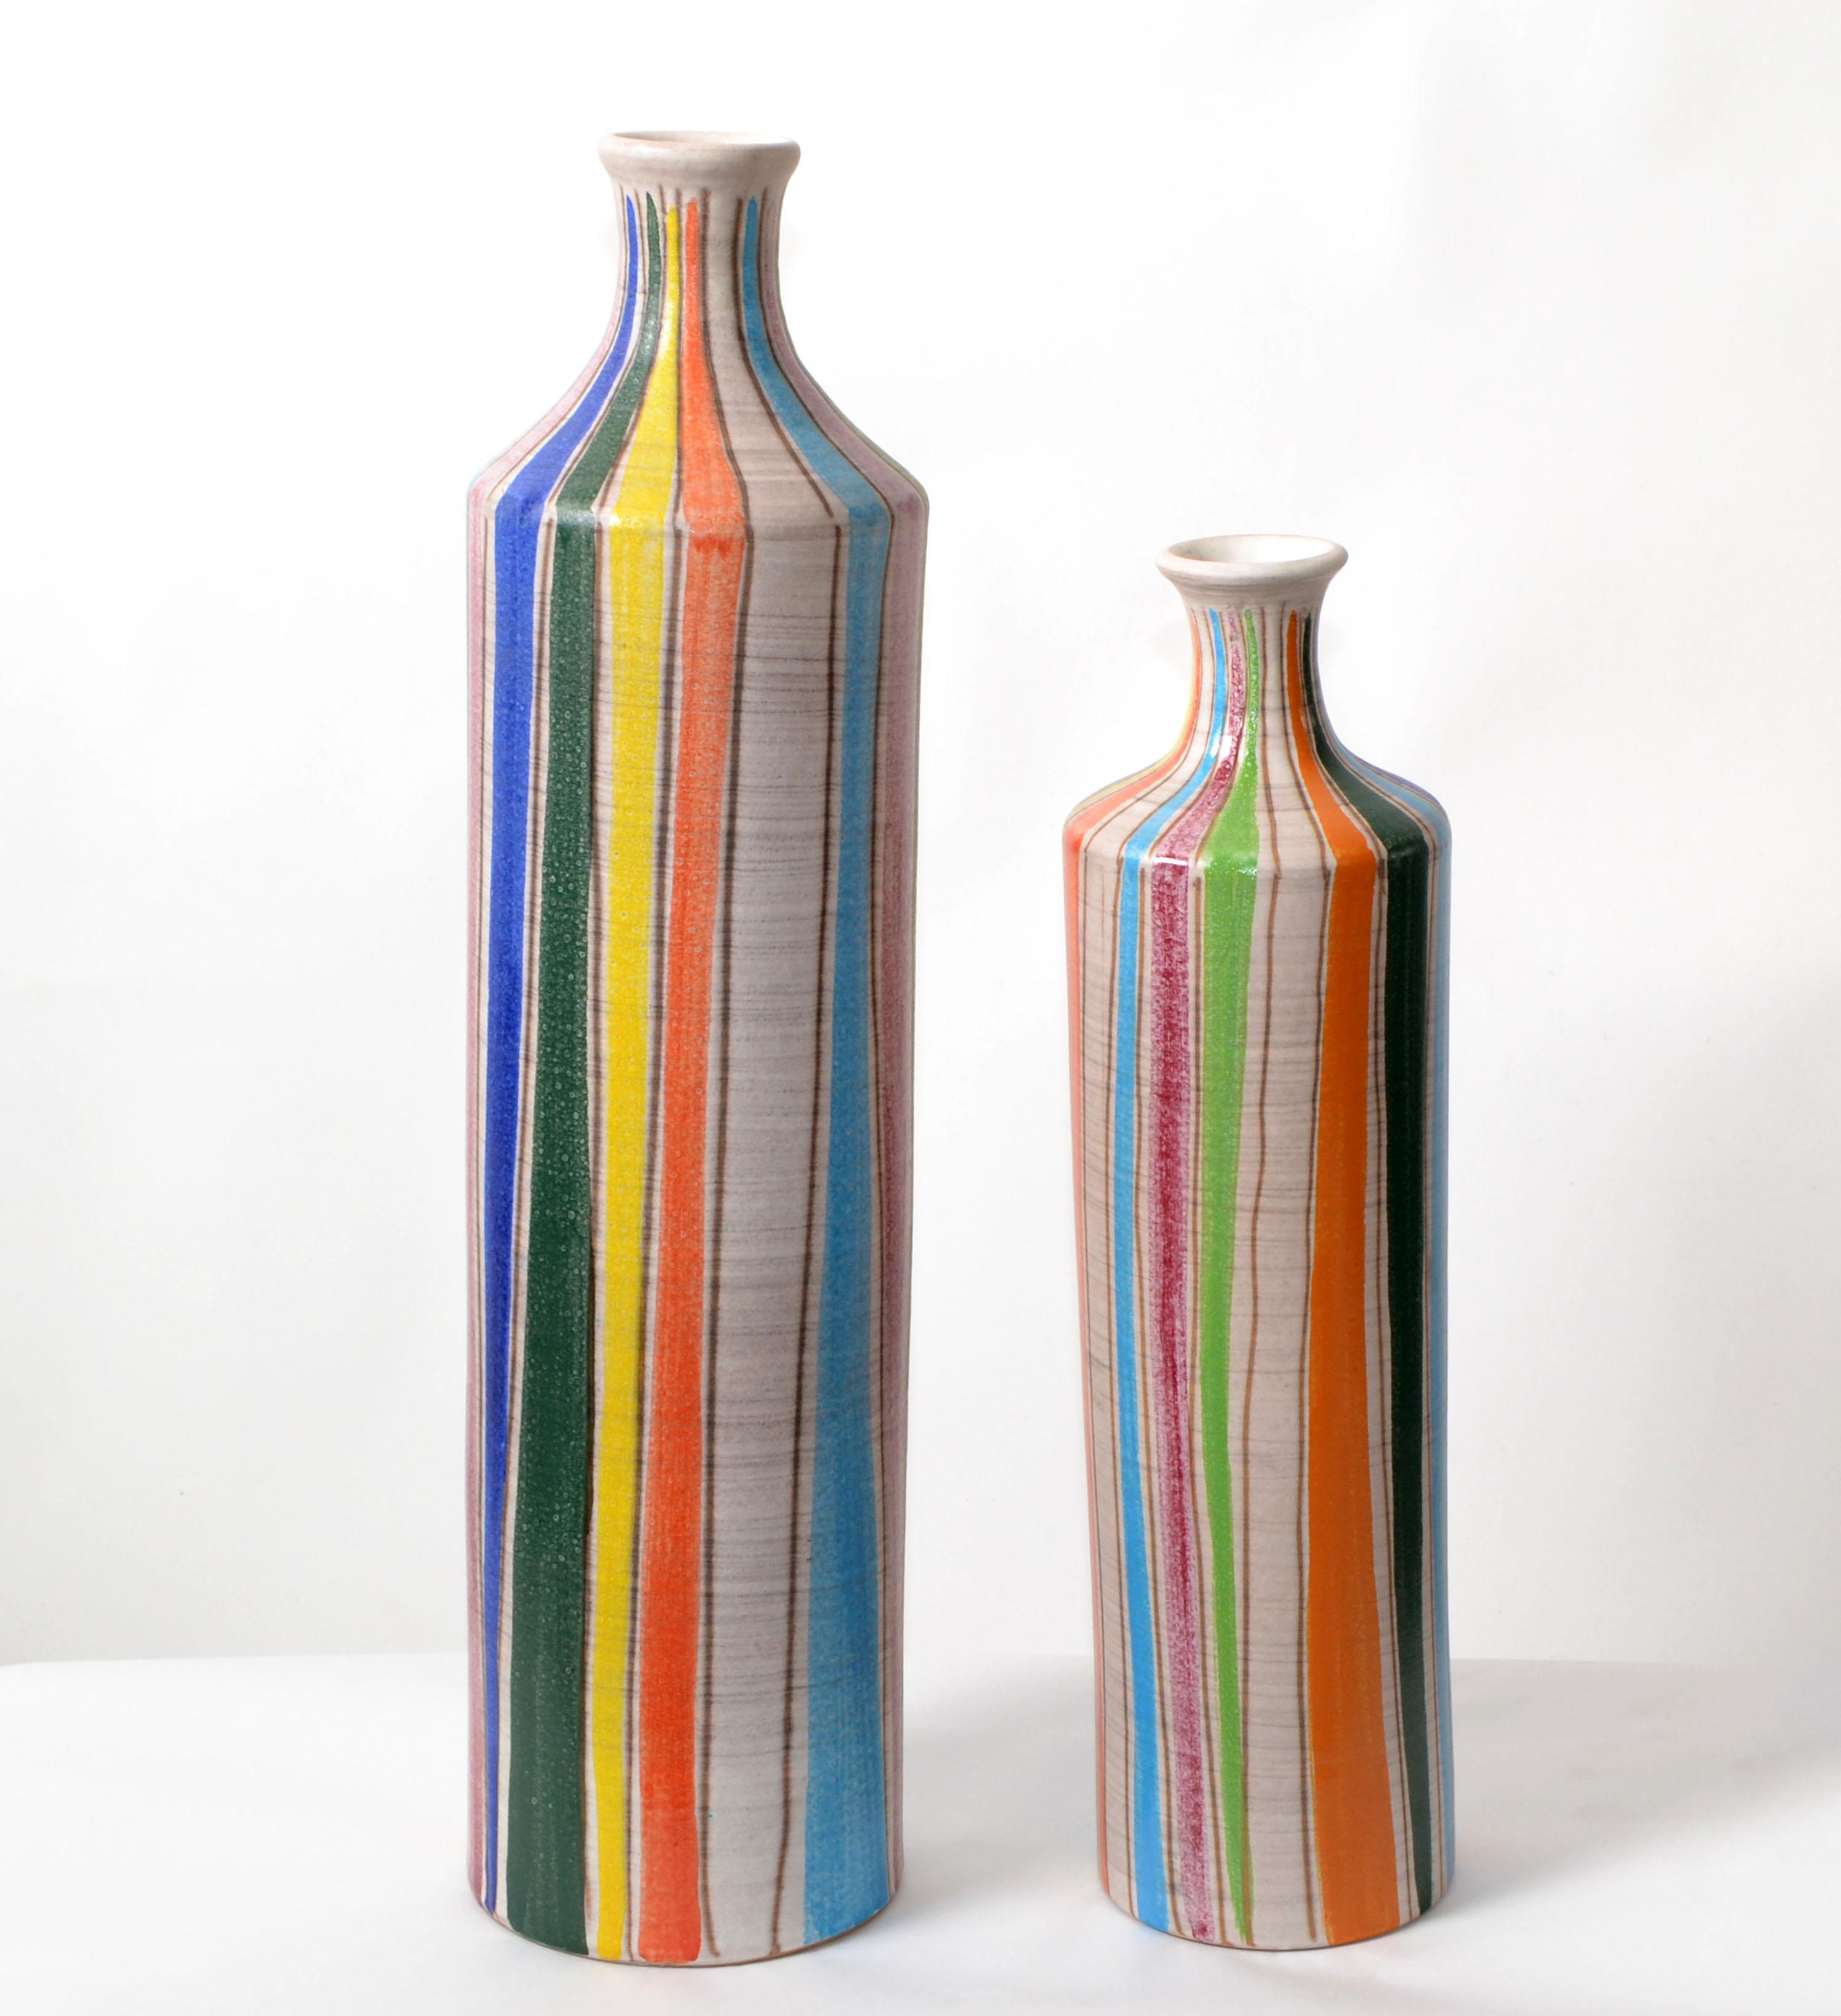 Studio A Italy, Mid-Century Modern glazed striped Set of ceramic vases, pottery in a tall round vessel shape.
Marked at the base, Studio A, Made in Italy.
The smaller wheat vase measures 4.25 diameter x 16.38 inches Height.